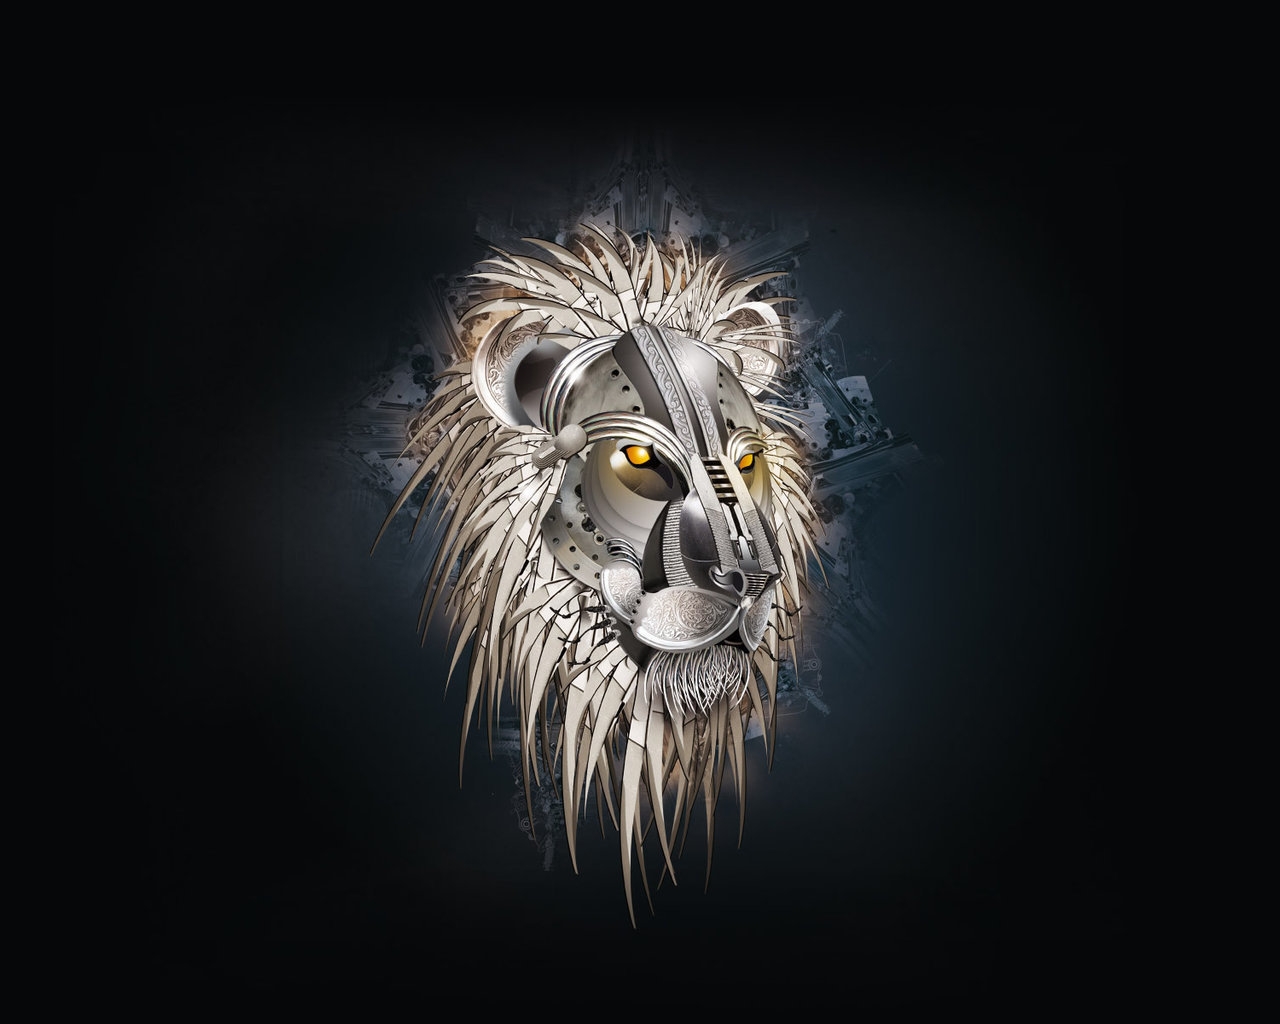 Lion head drawing for 1280 x 1024 resolution